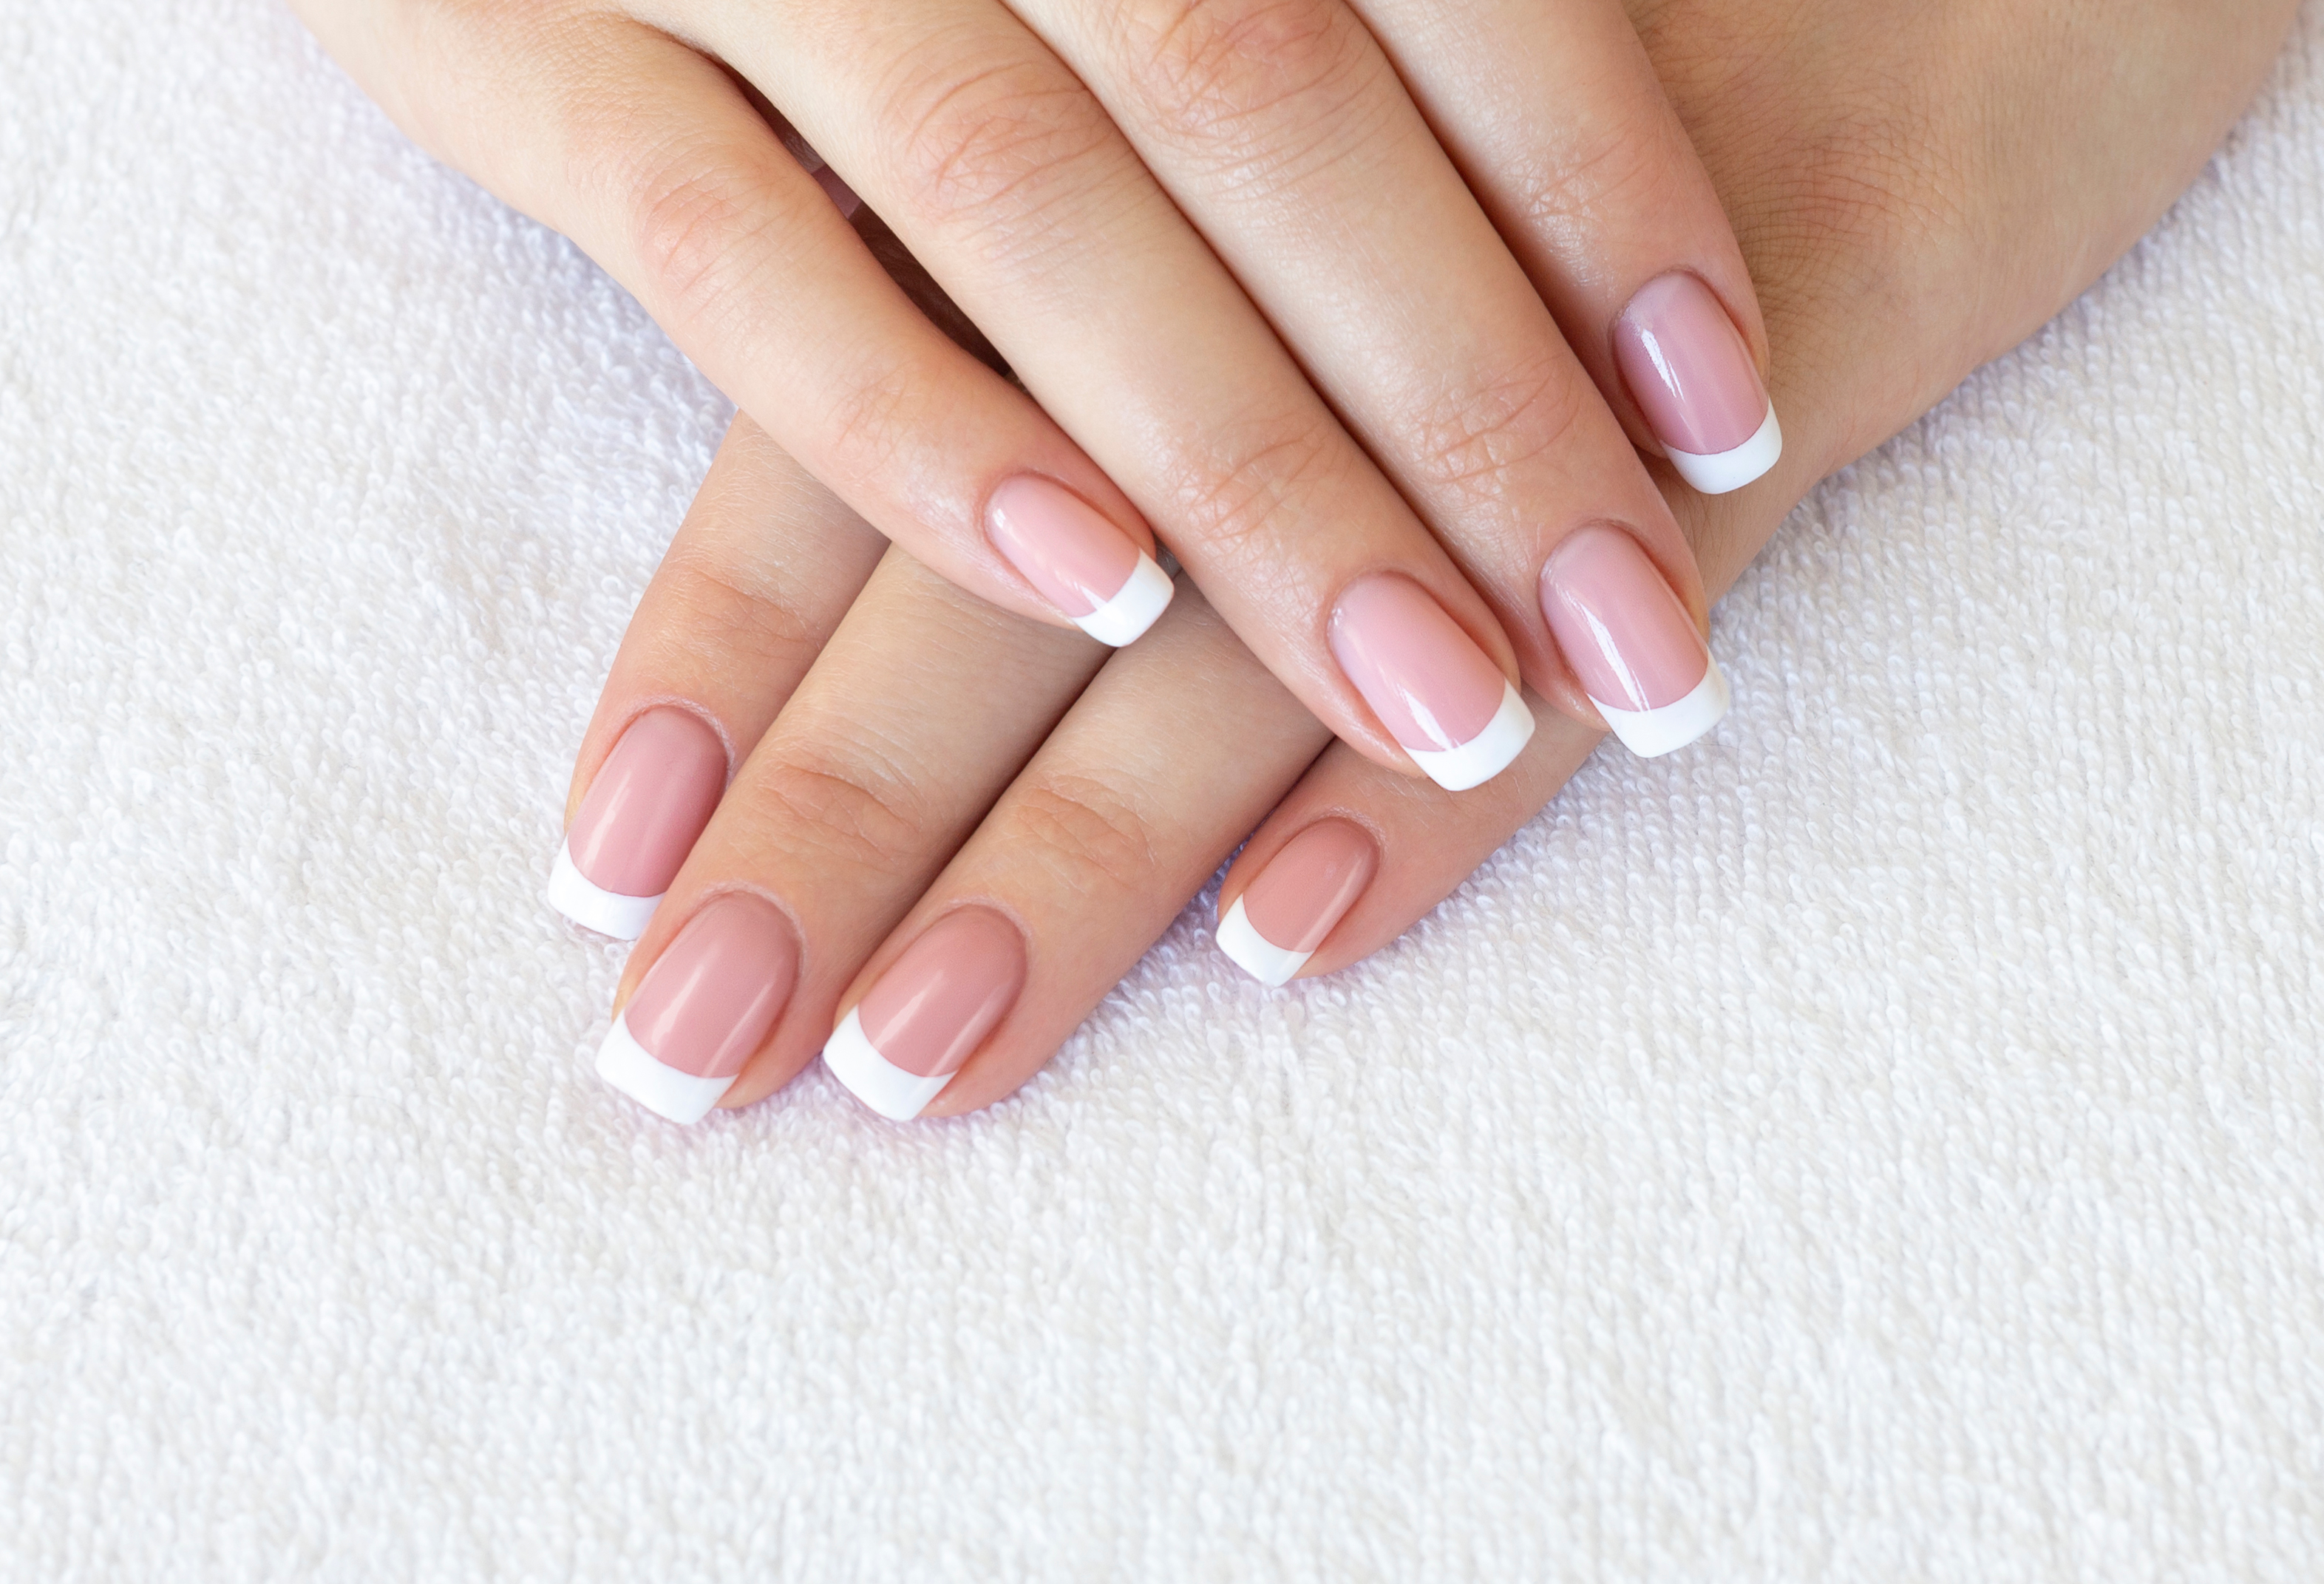 Standard French manicure with transparent nail polish on female hands | Source: Shutterstock